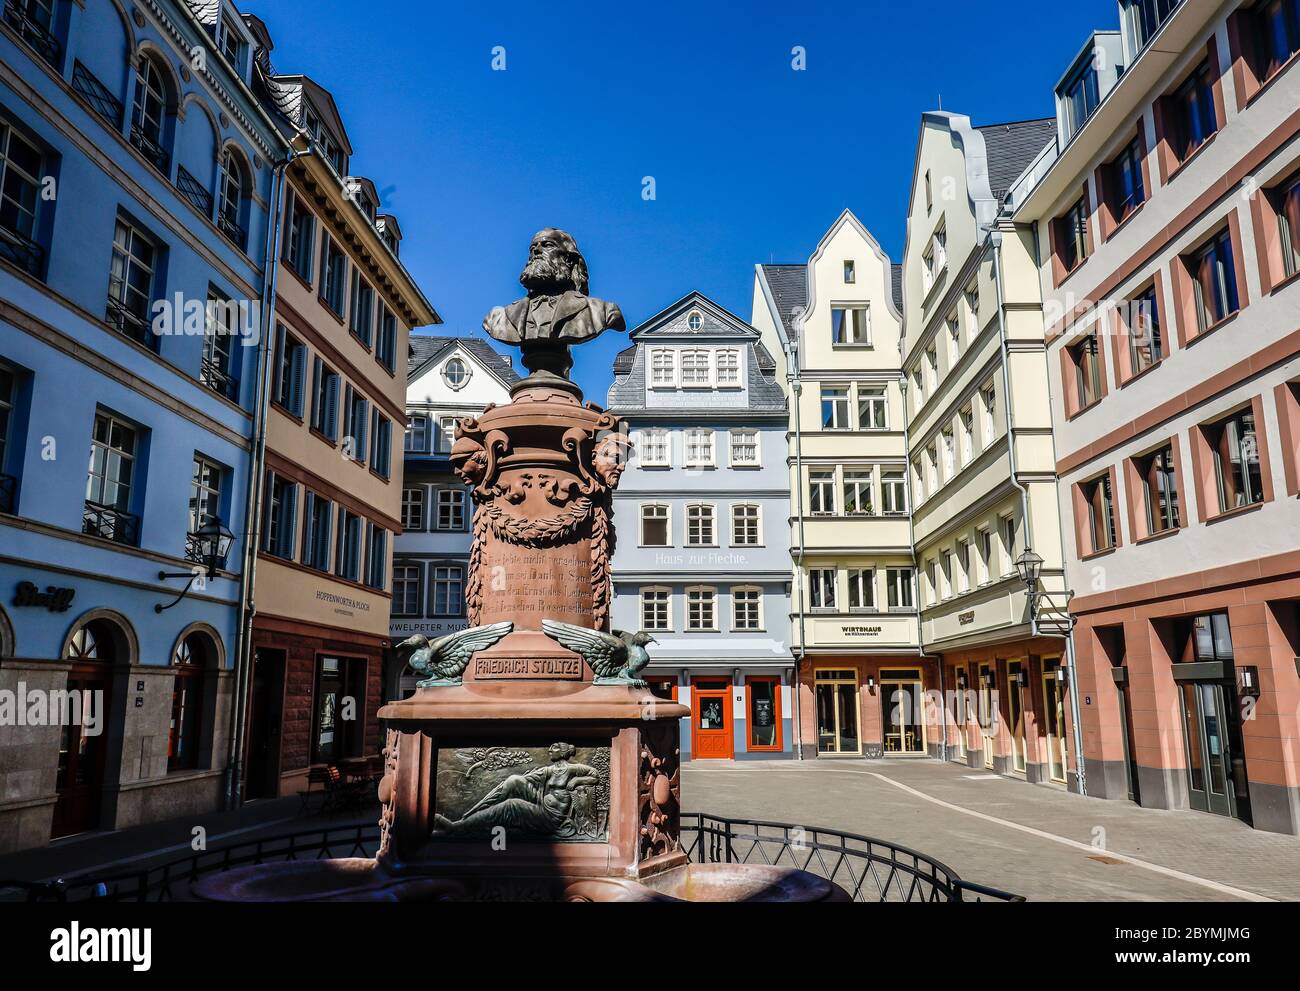 01.04.2020, Frankfurt am Main, Hesse, Germany - New Old Town, chicken market with Friedrich-Stoltze fountain, deserted downtown during the Corona cris Stock Photo